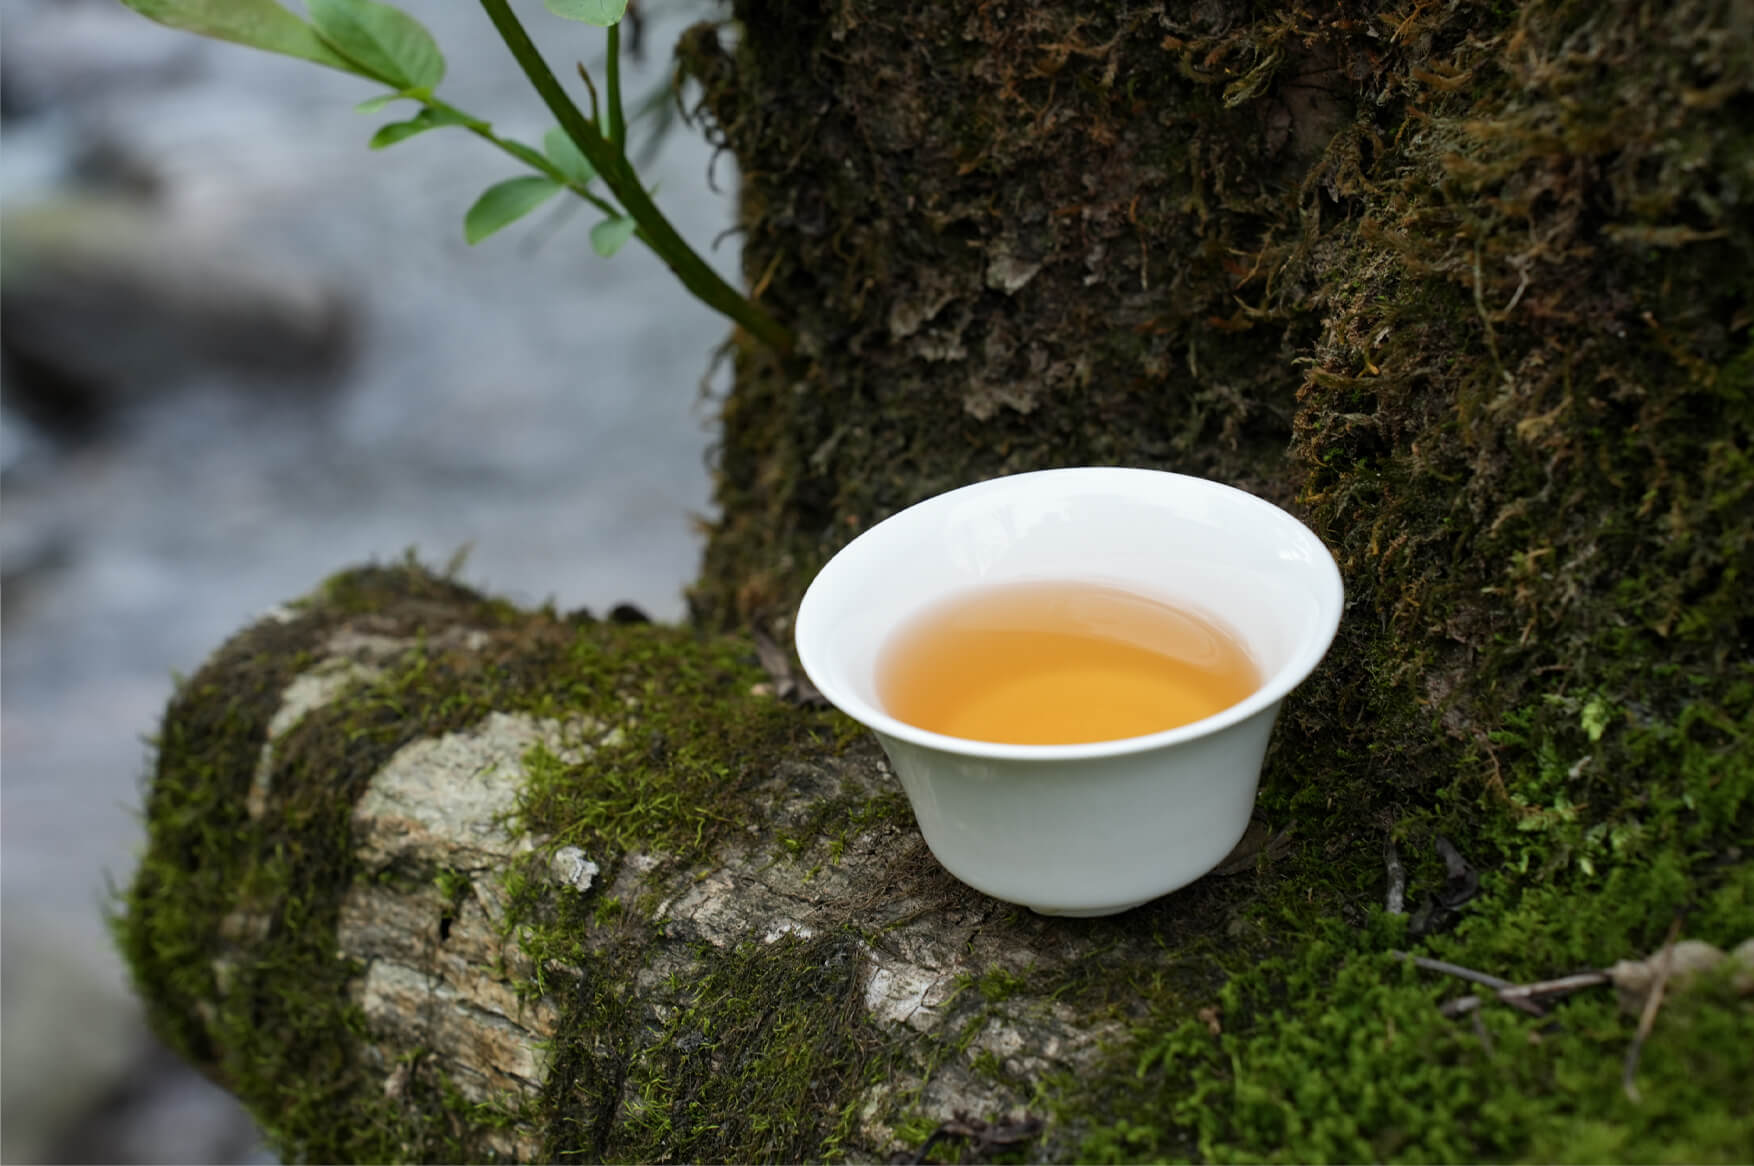 guangxi-old-tree-tea--cup-on-the-tree